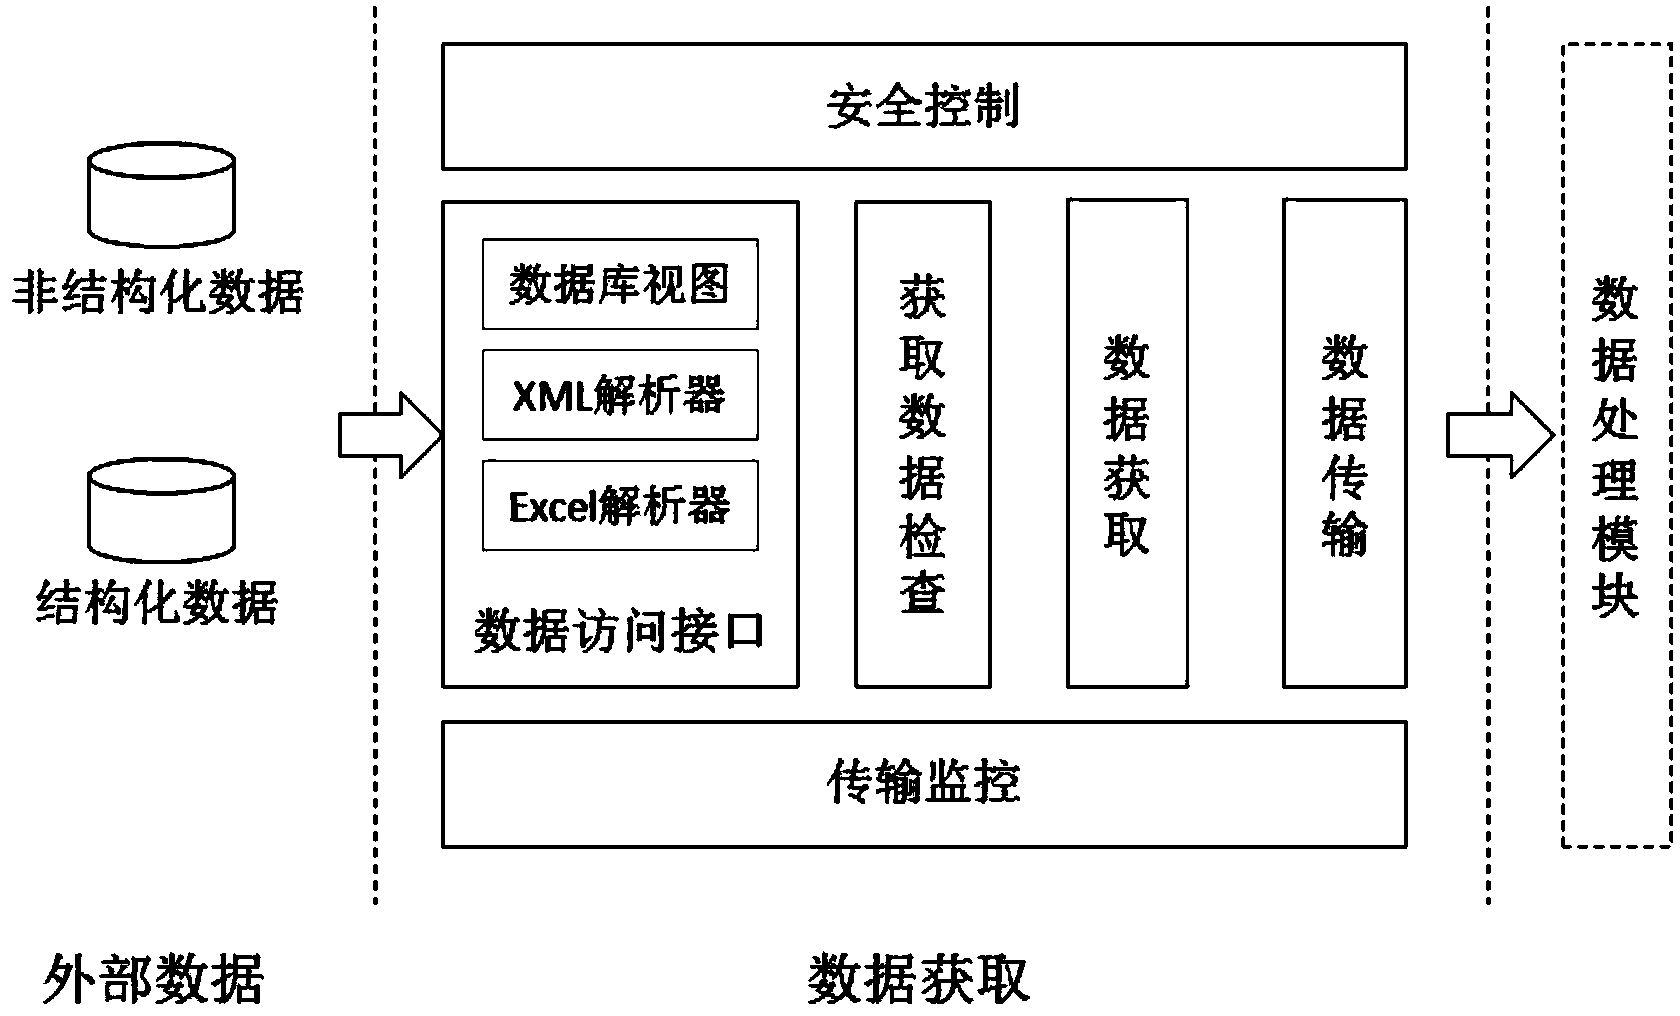 Credit data management system supporting complex enterprise environment and credit data management method